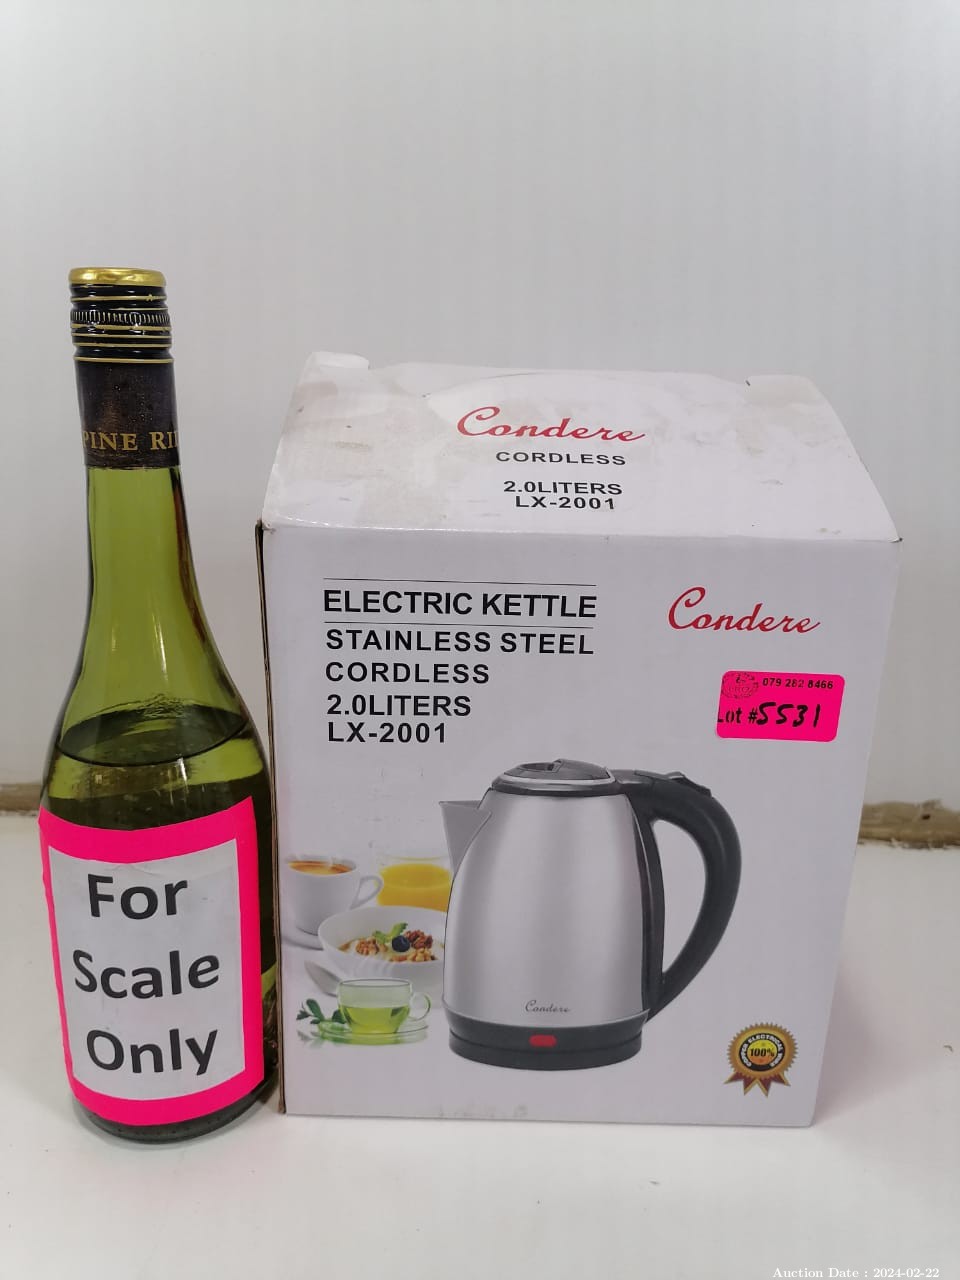 5643 - Condere Electric Kettle